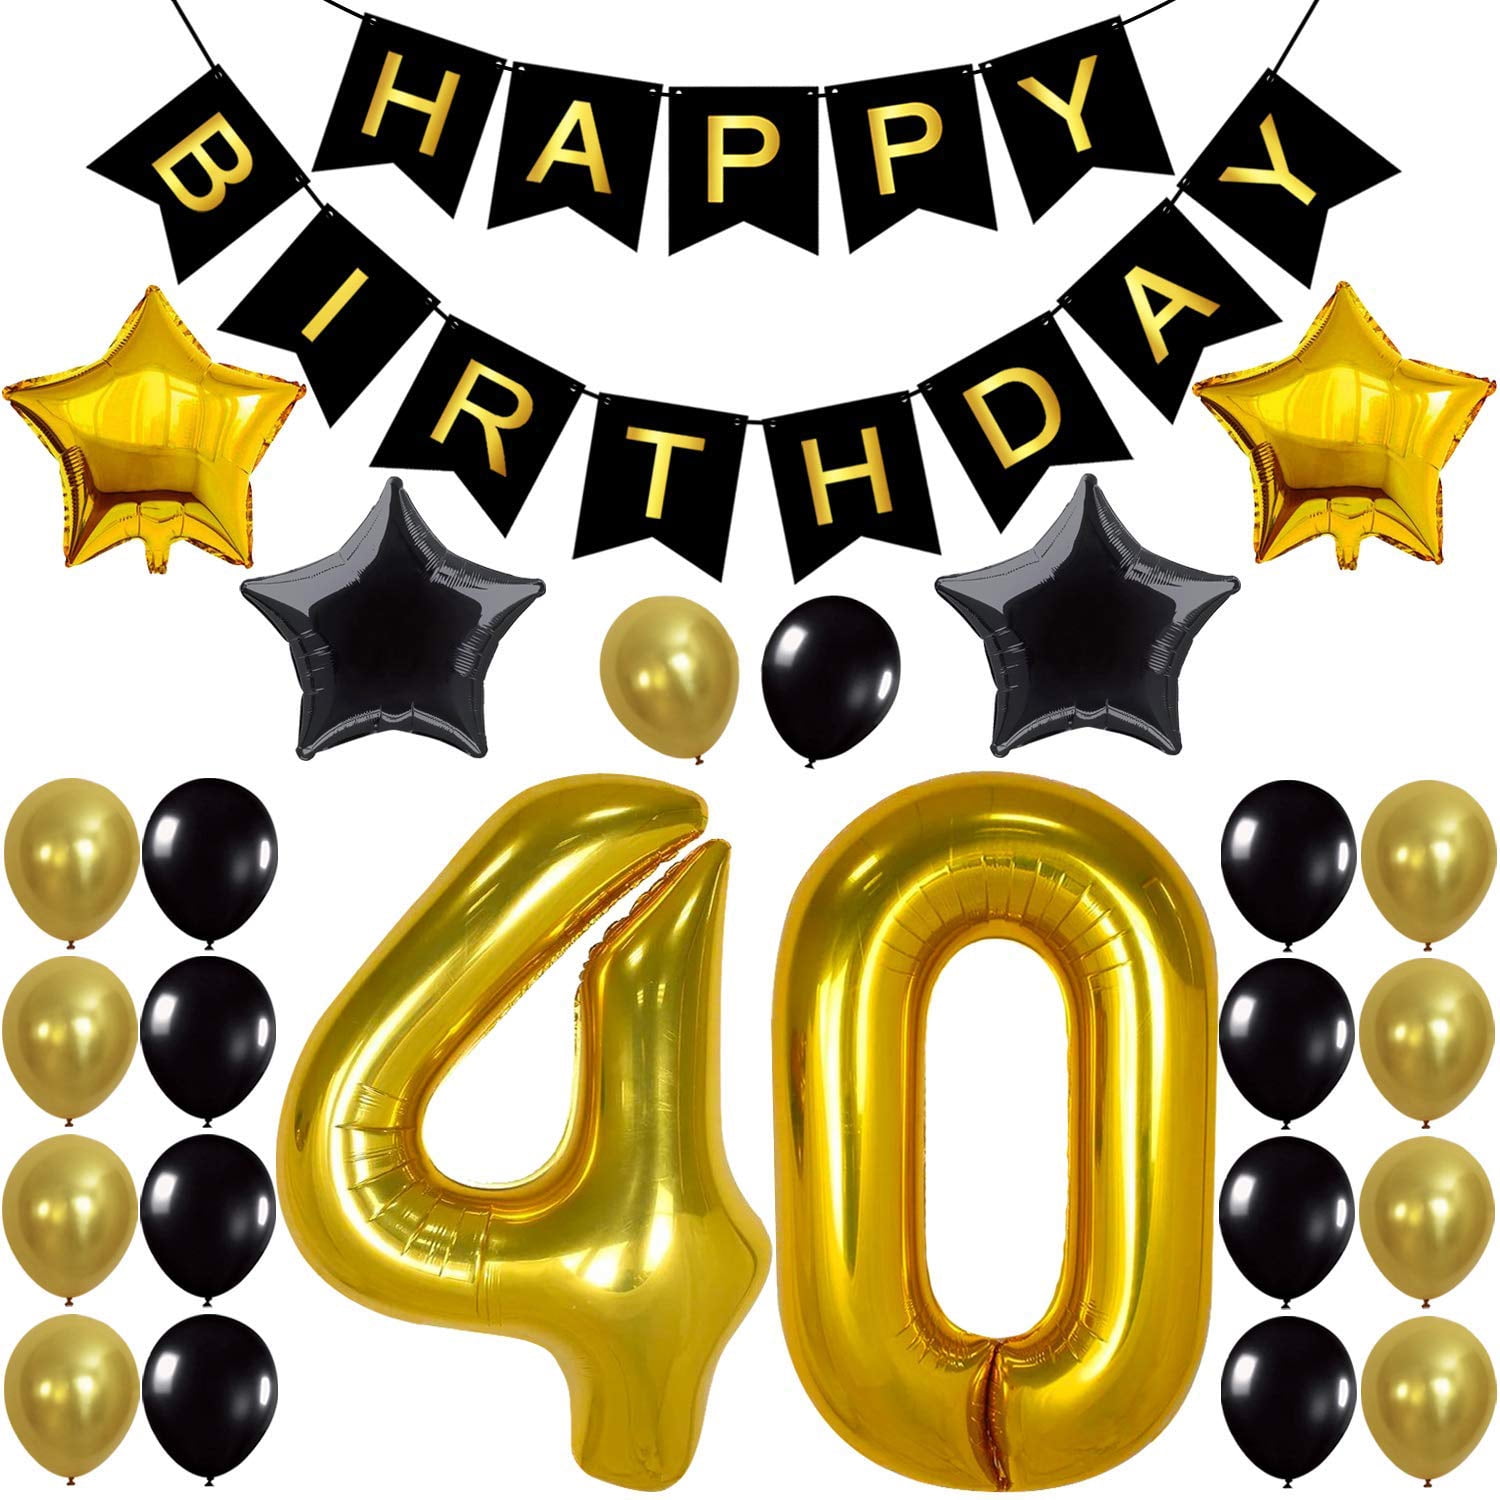 Gatherfun Birthday Party Supplies Happy 39th Birthday Banner Backdrop with 10 Pcs Balloons Black Gold Birthday Party Large Background Photo Props for Men and Women 39 Birthday Decorations